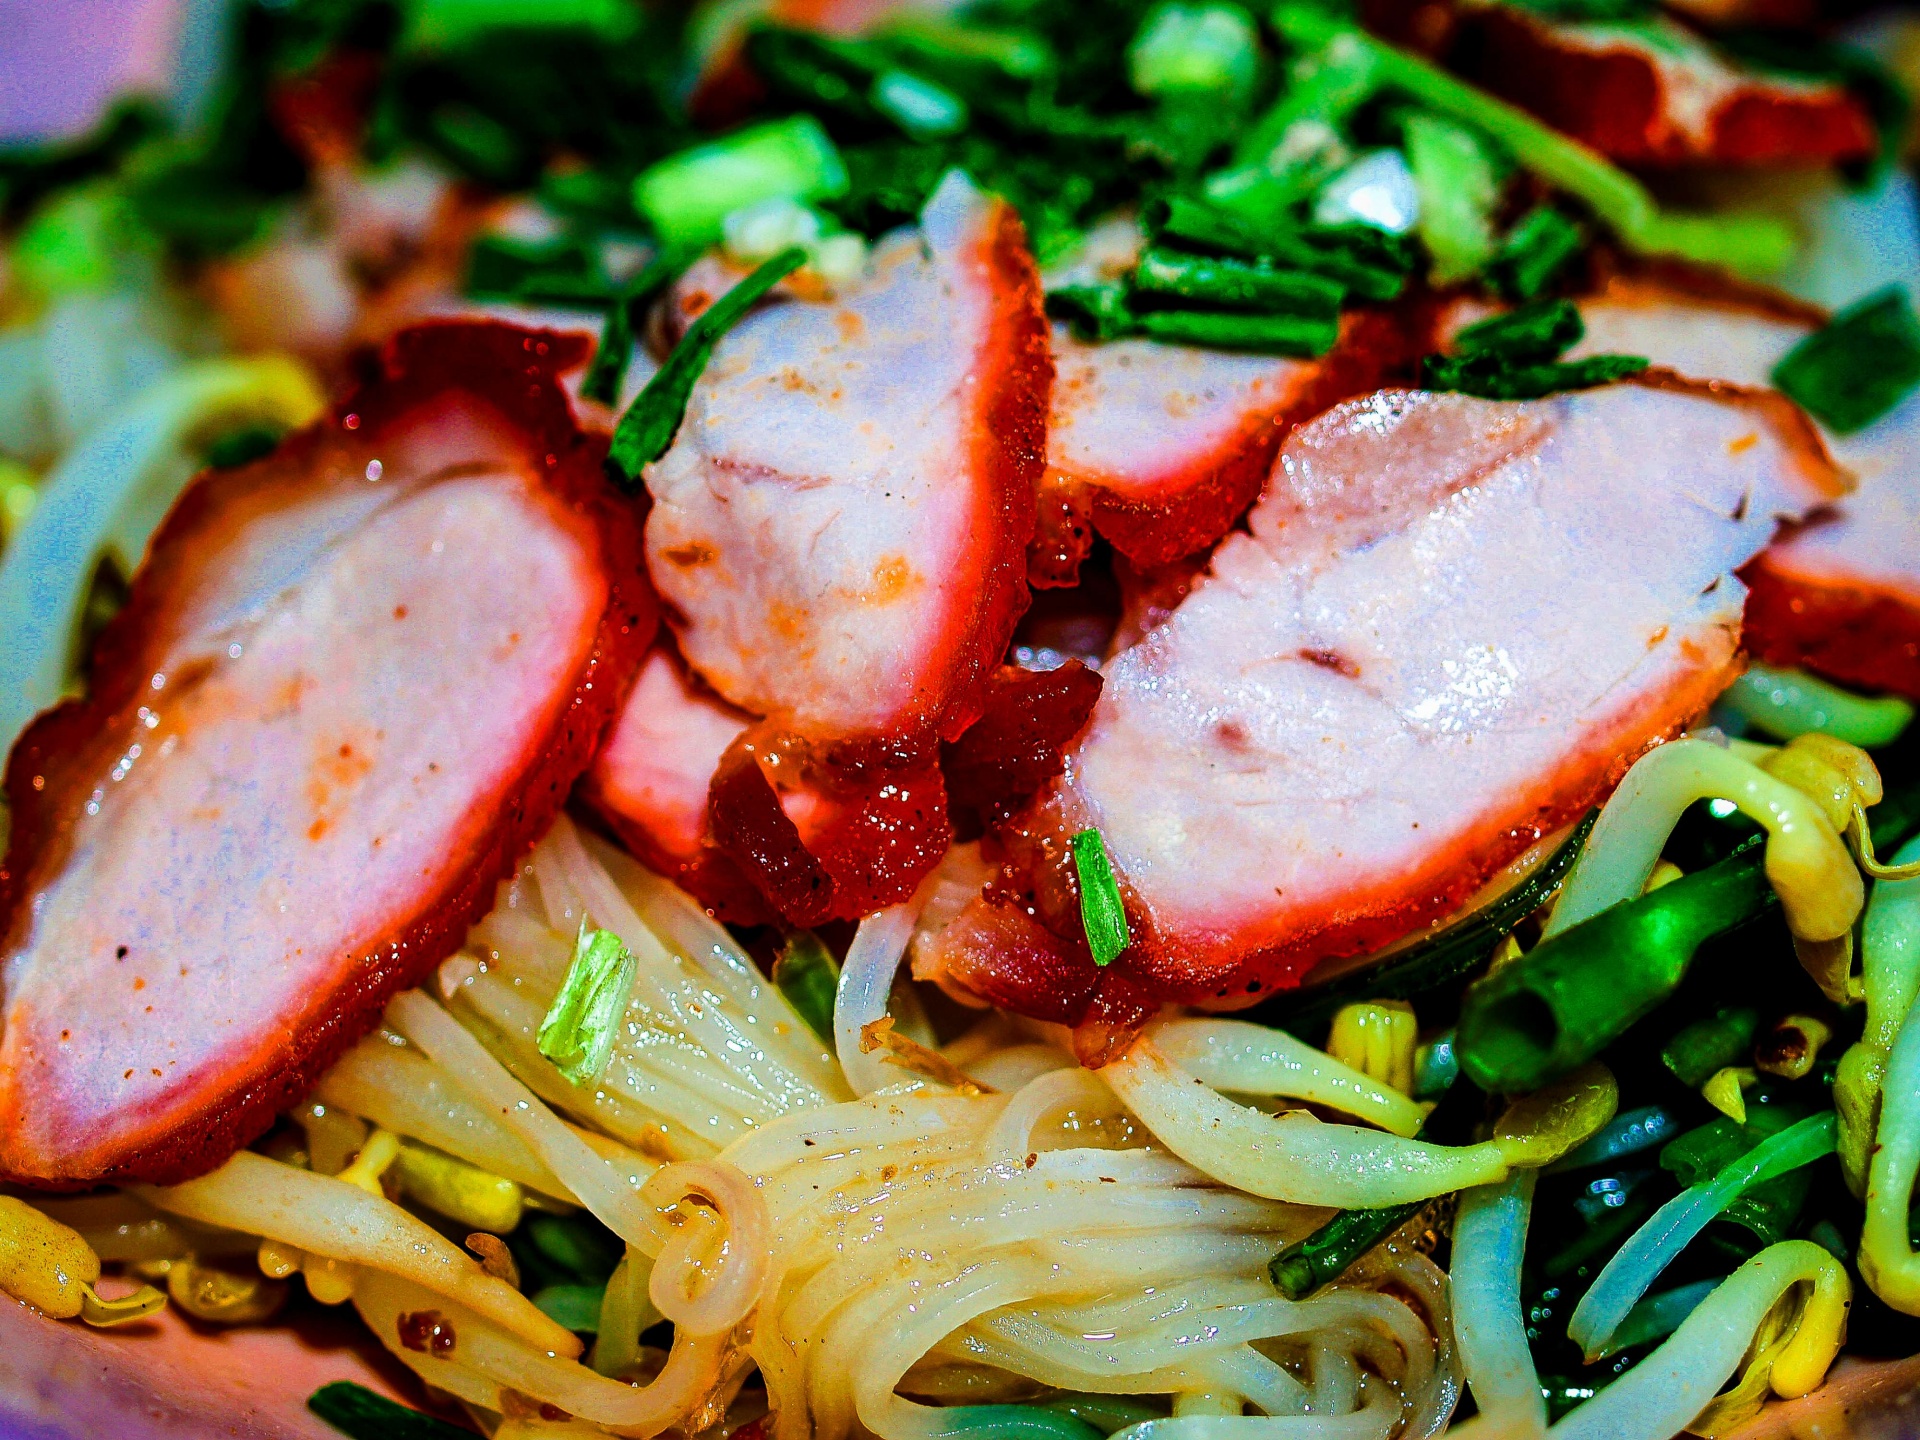 Thai Food Noodles With Vegetables, Meats